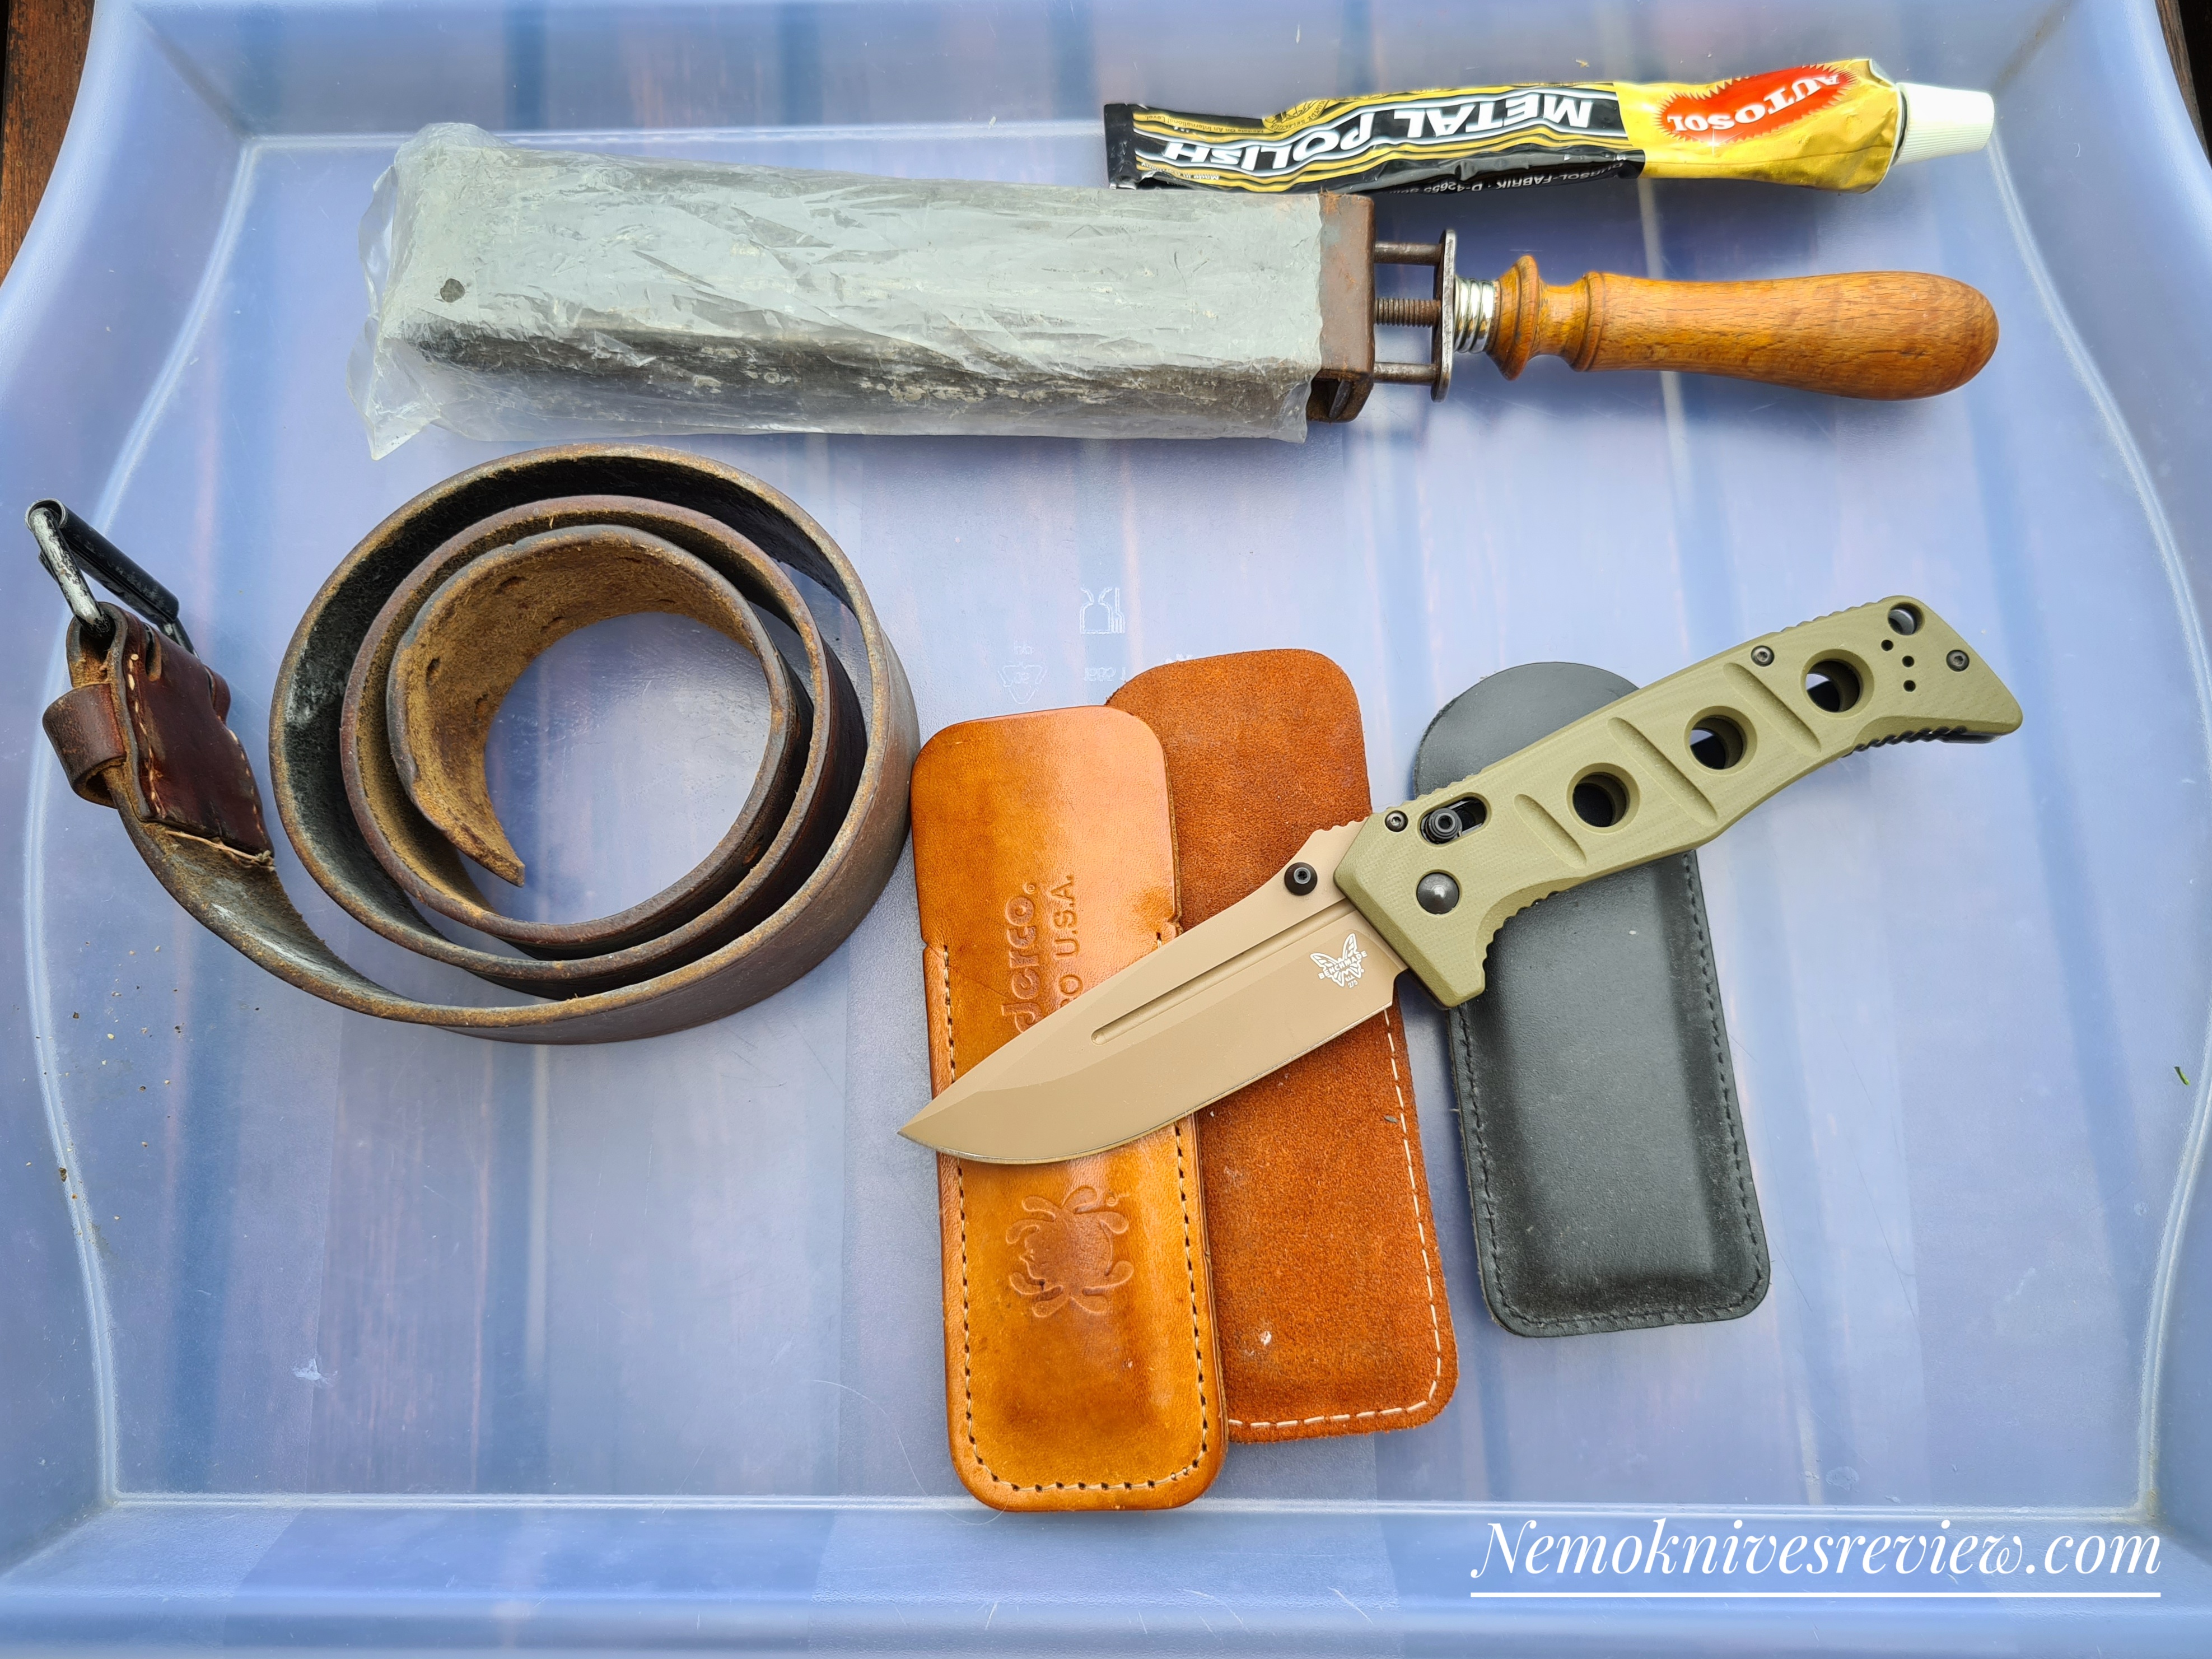 Benchmade BM275 Adamas part 2: Reprofiling – From Puff Daddy to